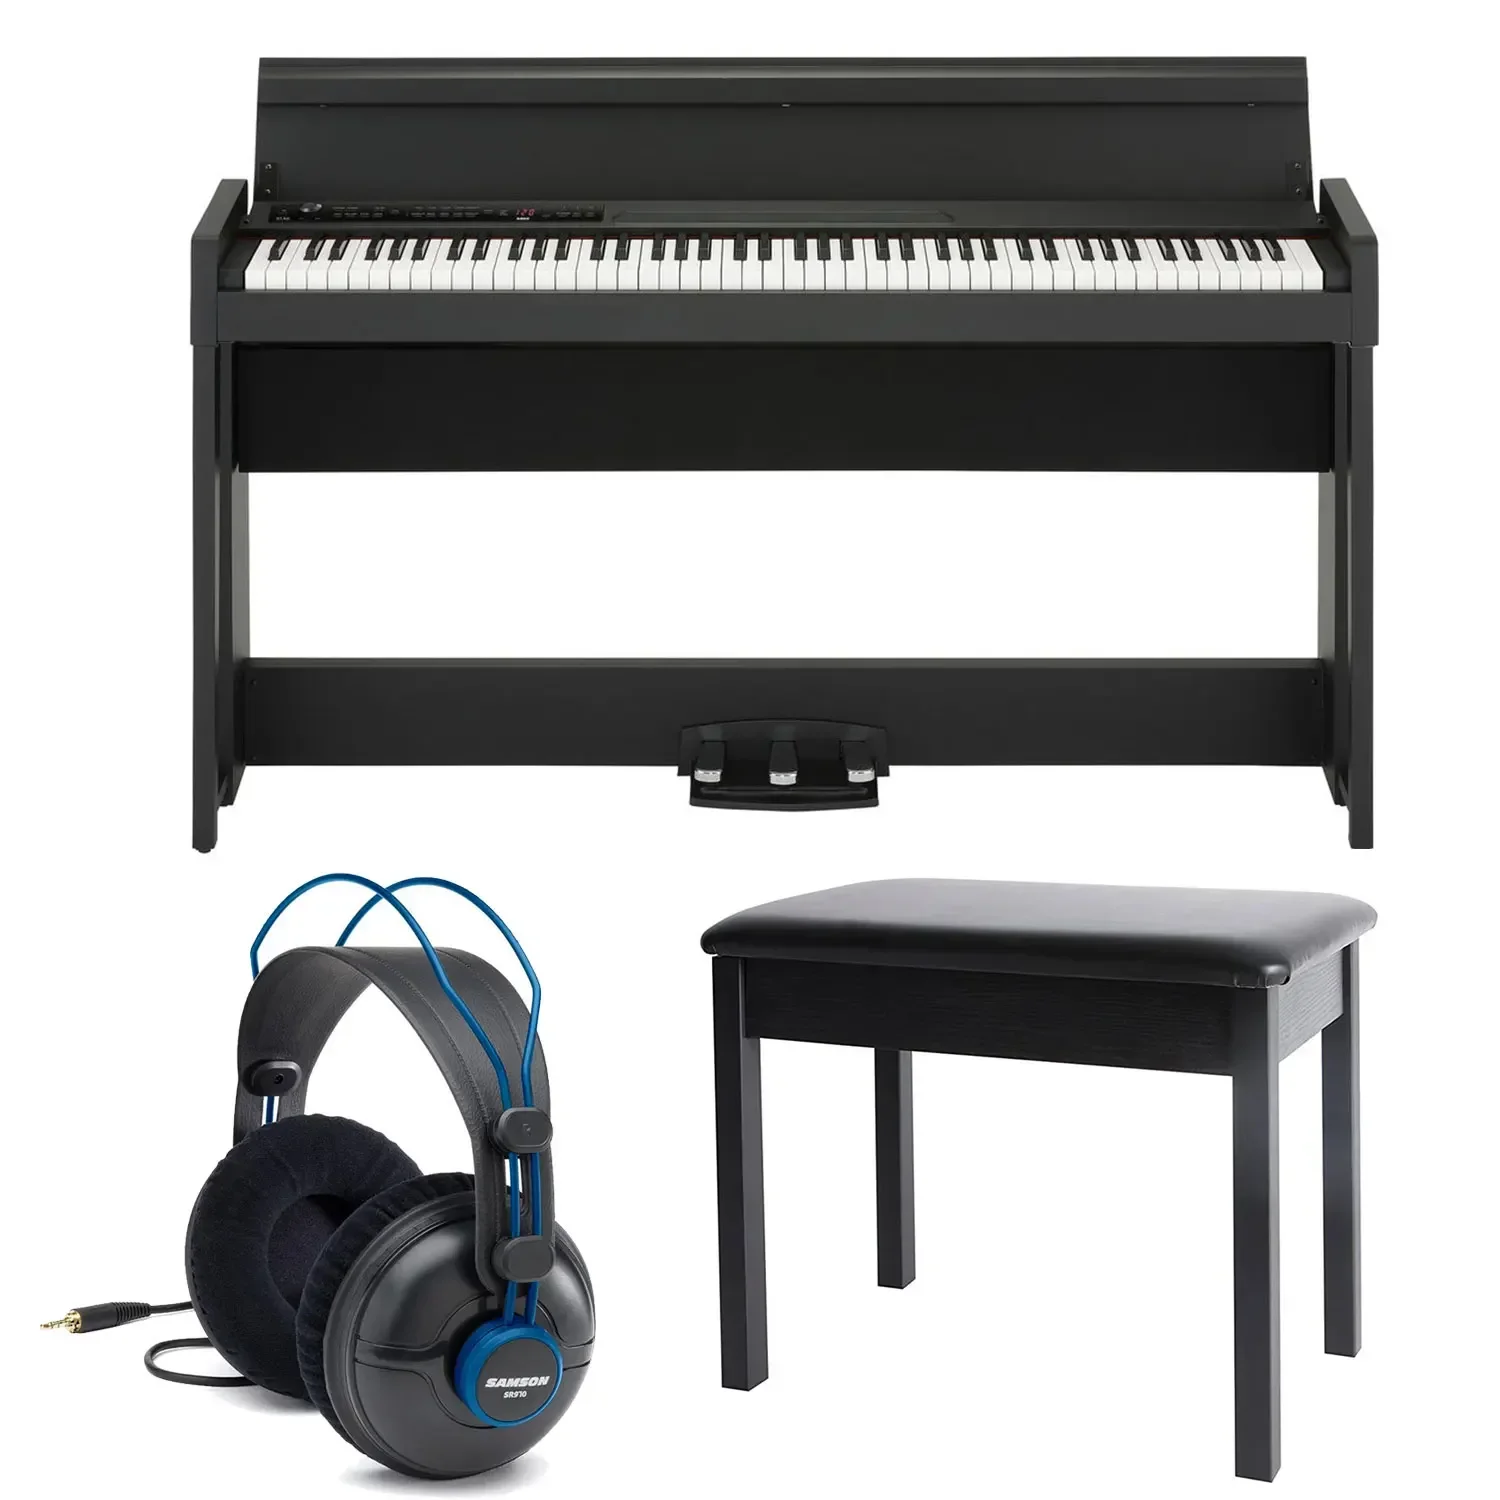 

(NEW DISCOUNT) Korg C1 Air Bluetooth 88 Key Digital Piano with Hammer Action 3 Keyboard + Headphones